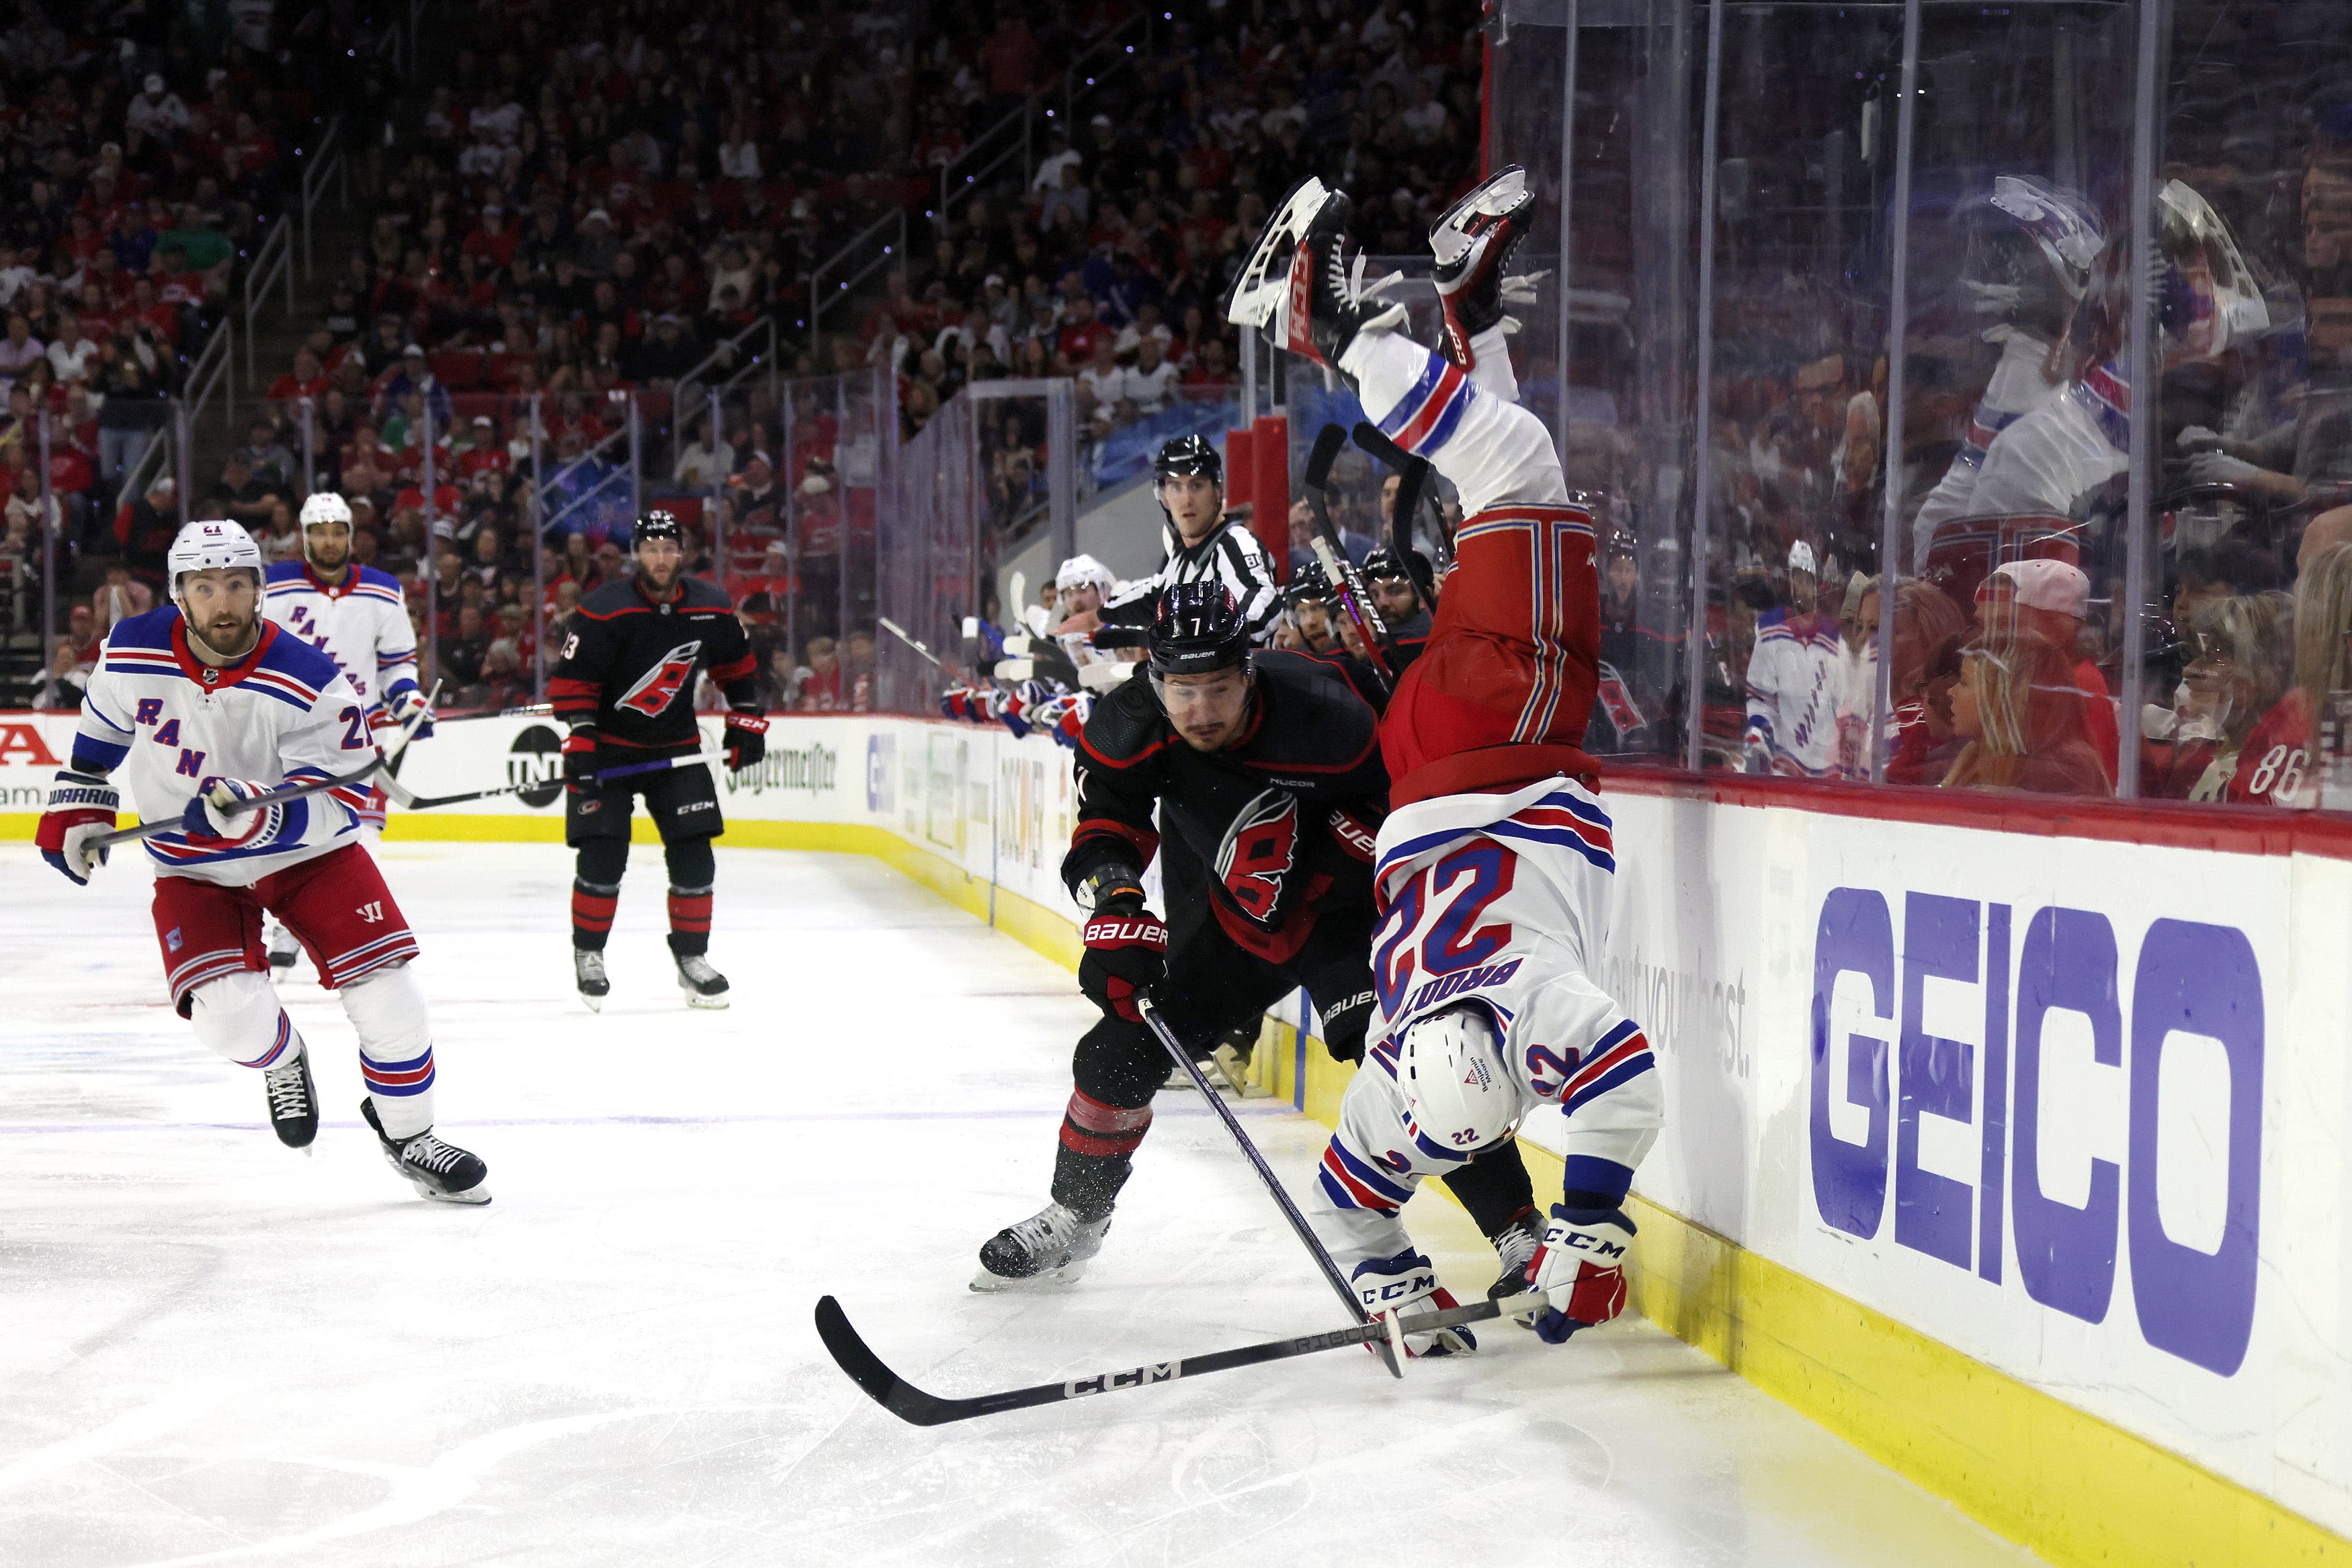 Game 4 takeaways: Rangers miss out on chance for record-setting sweep